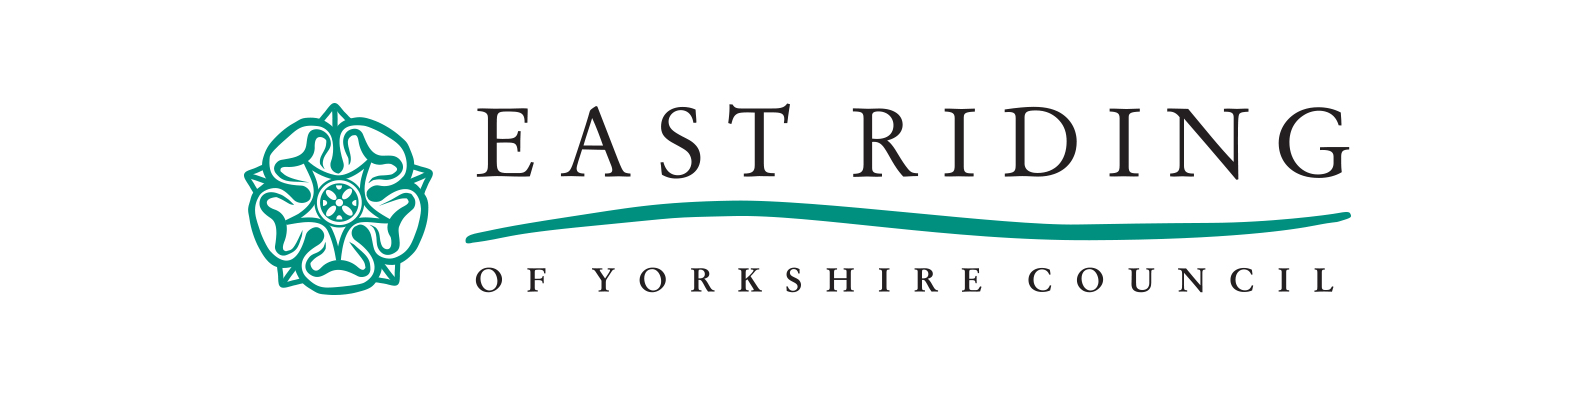 logo of East Riding of Yorkshire Council